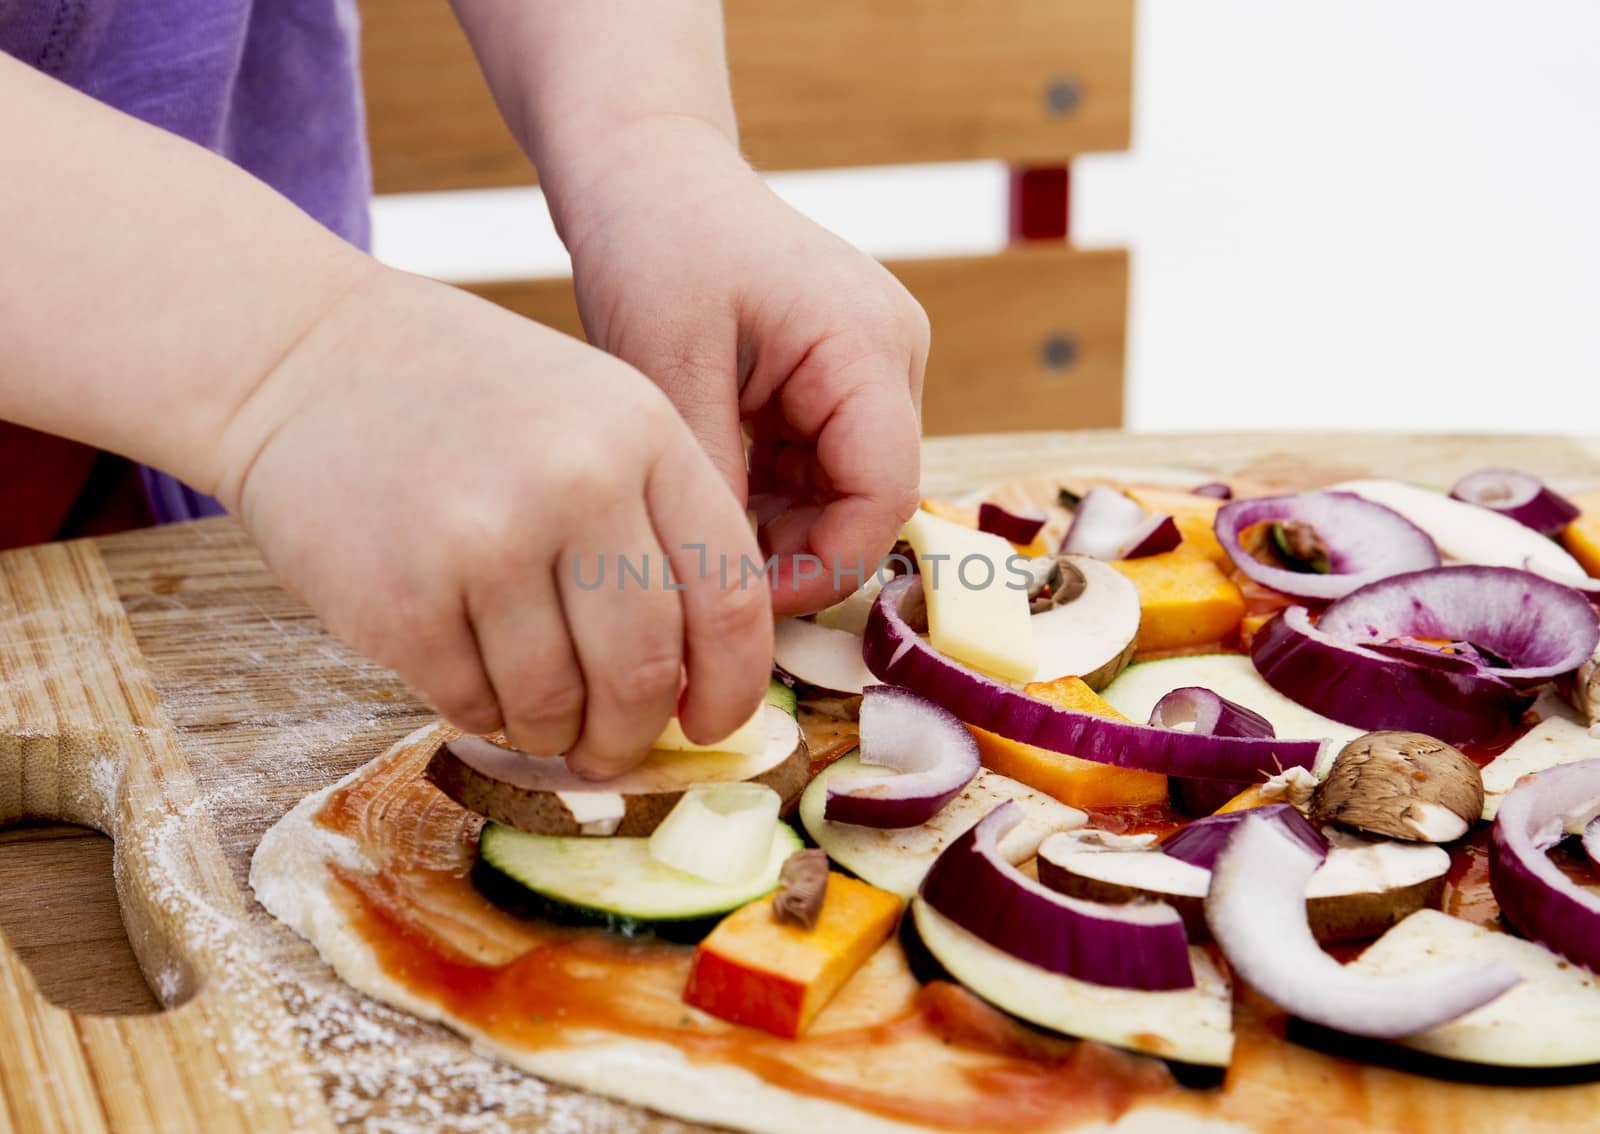 small hands preparing fresh pizza with many vegetables